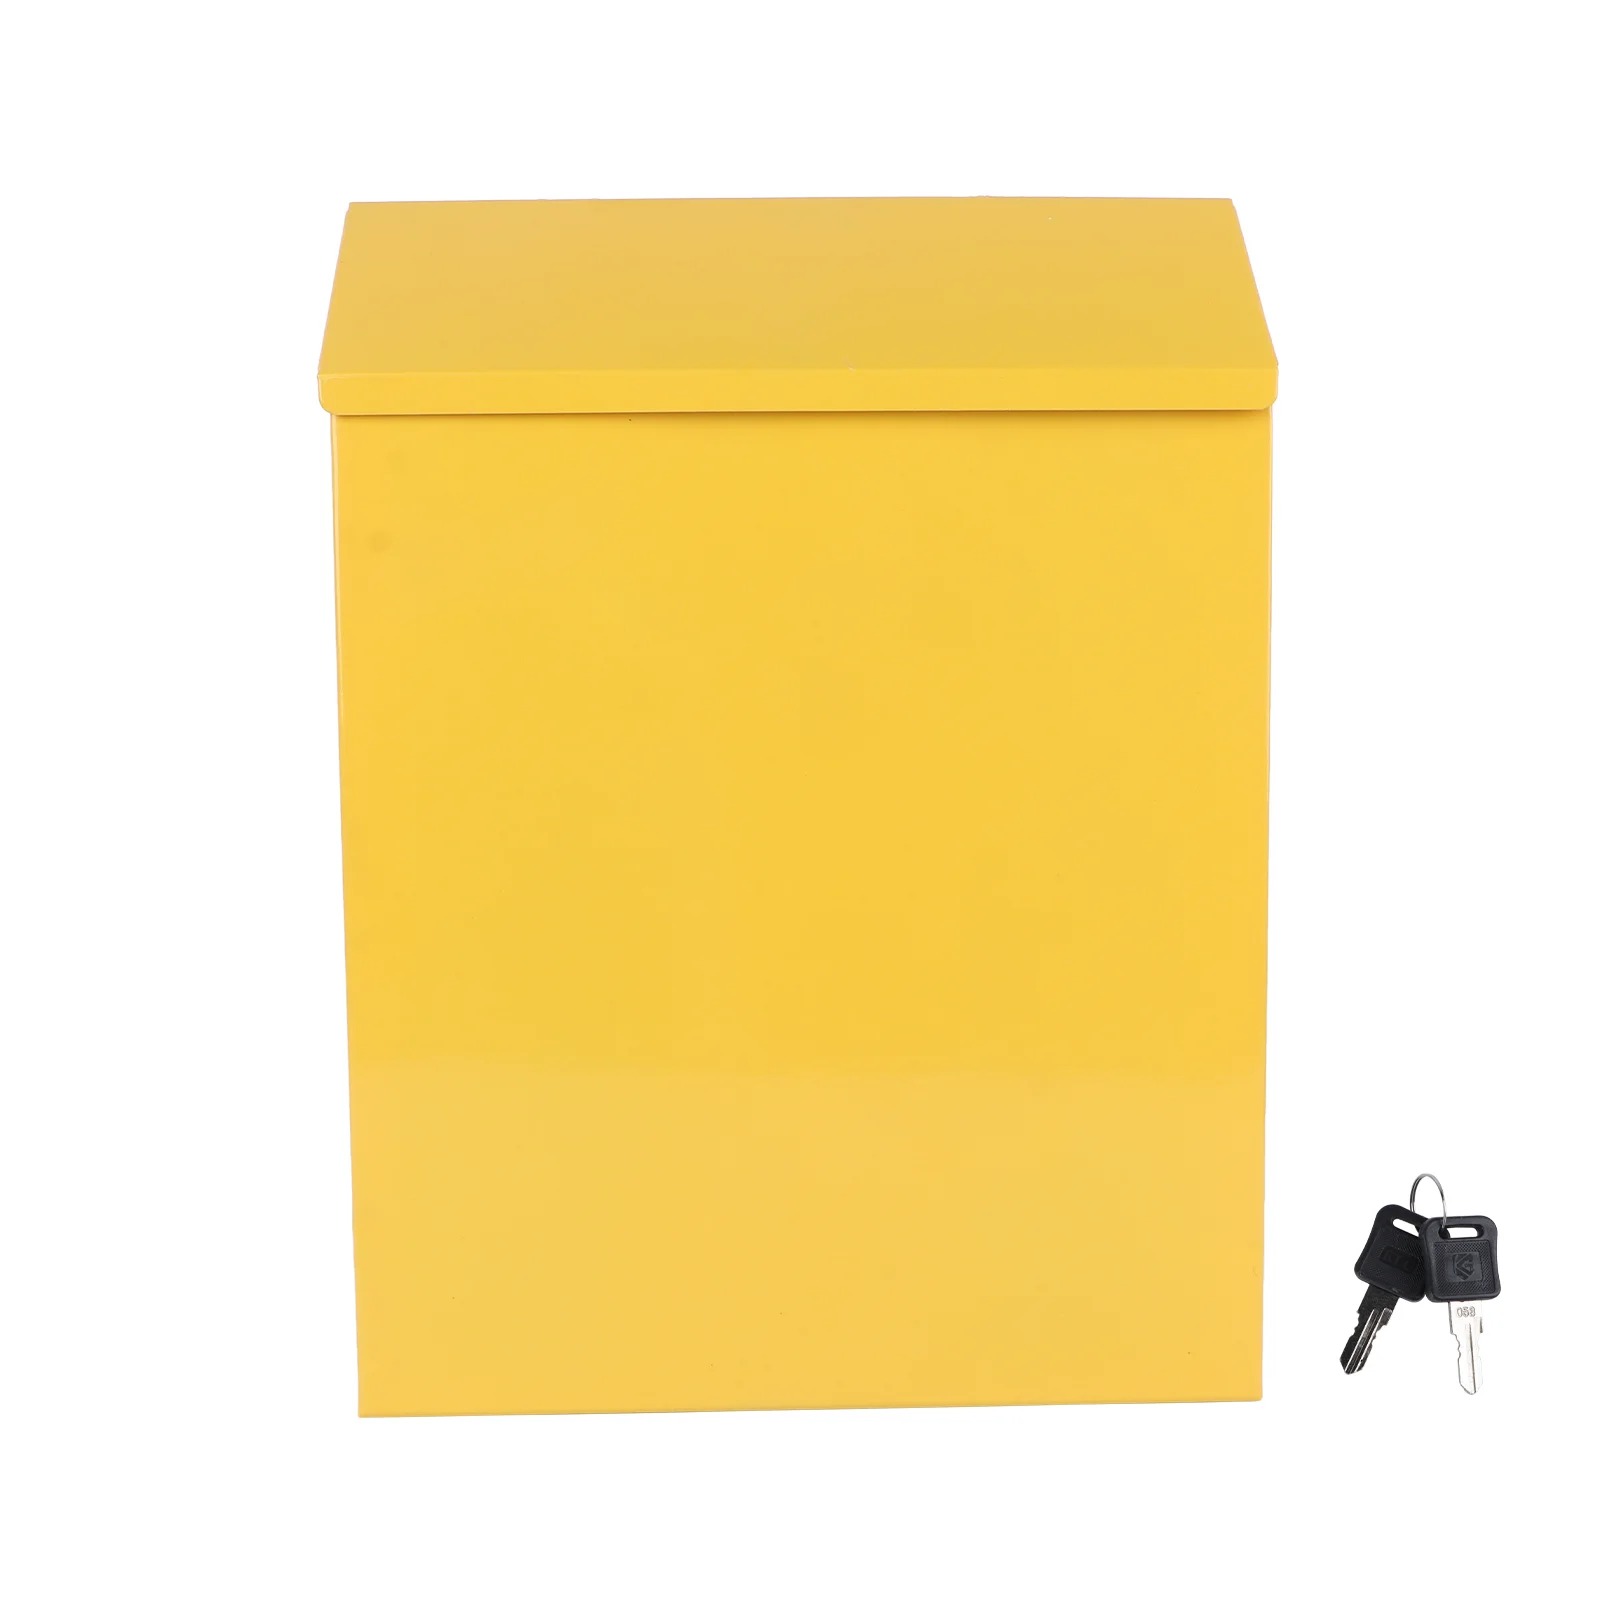 Wall Mount Mailbox Locking Drop Box Steel Mailbox Rent Payments Mail Keys Weatherproof Galvanized Cover Safe